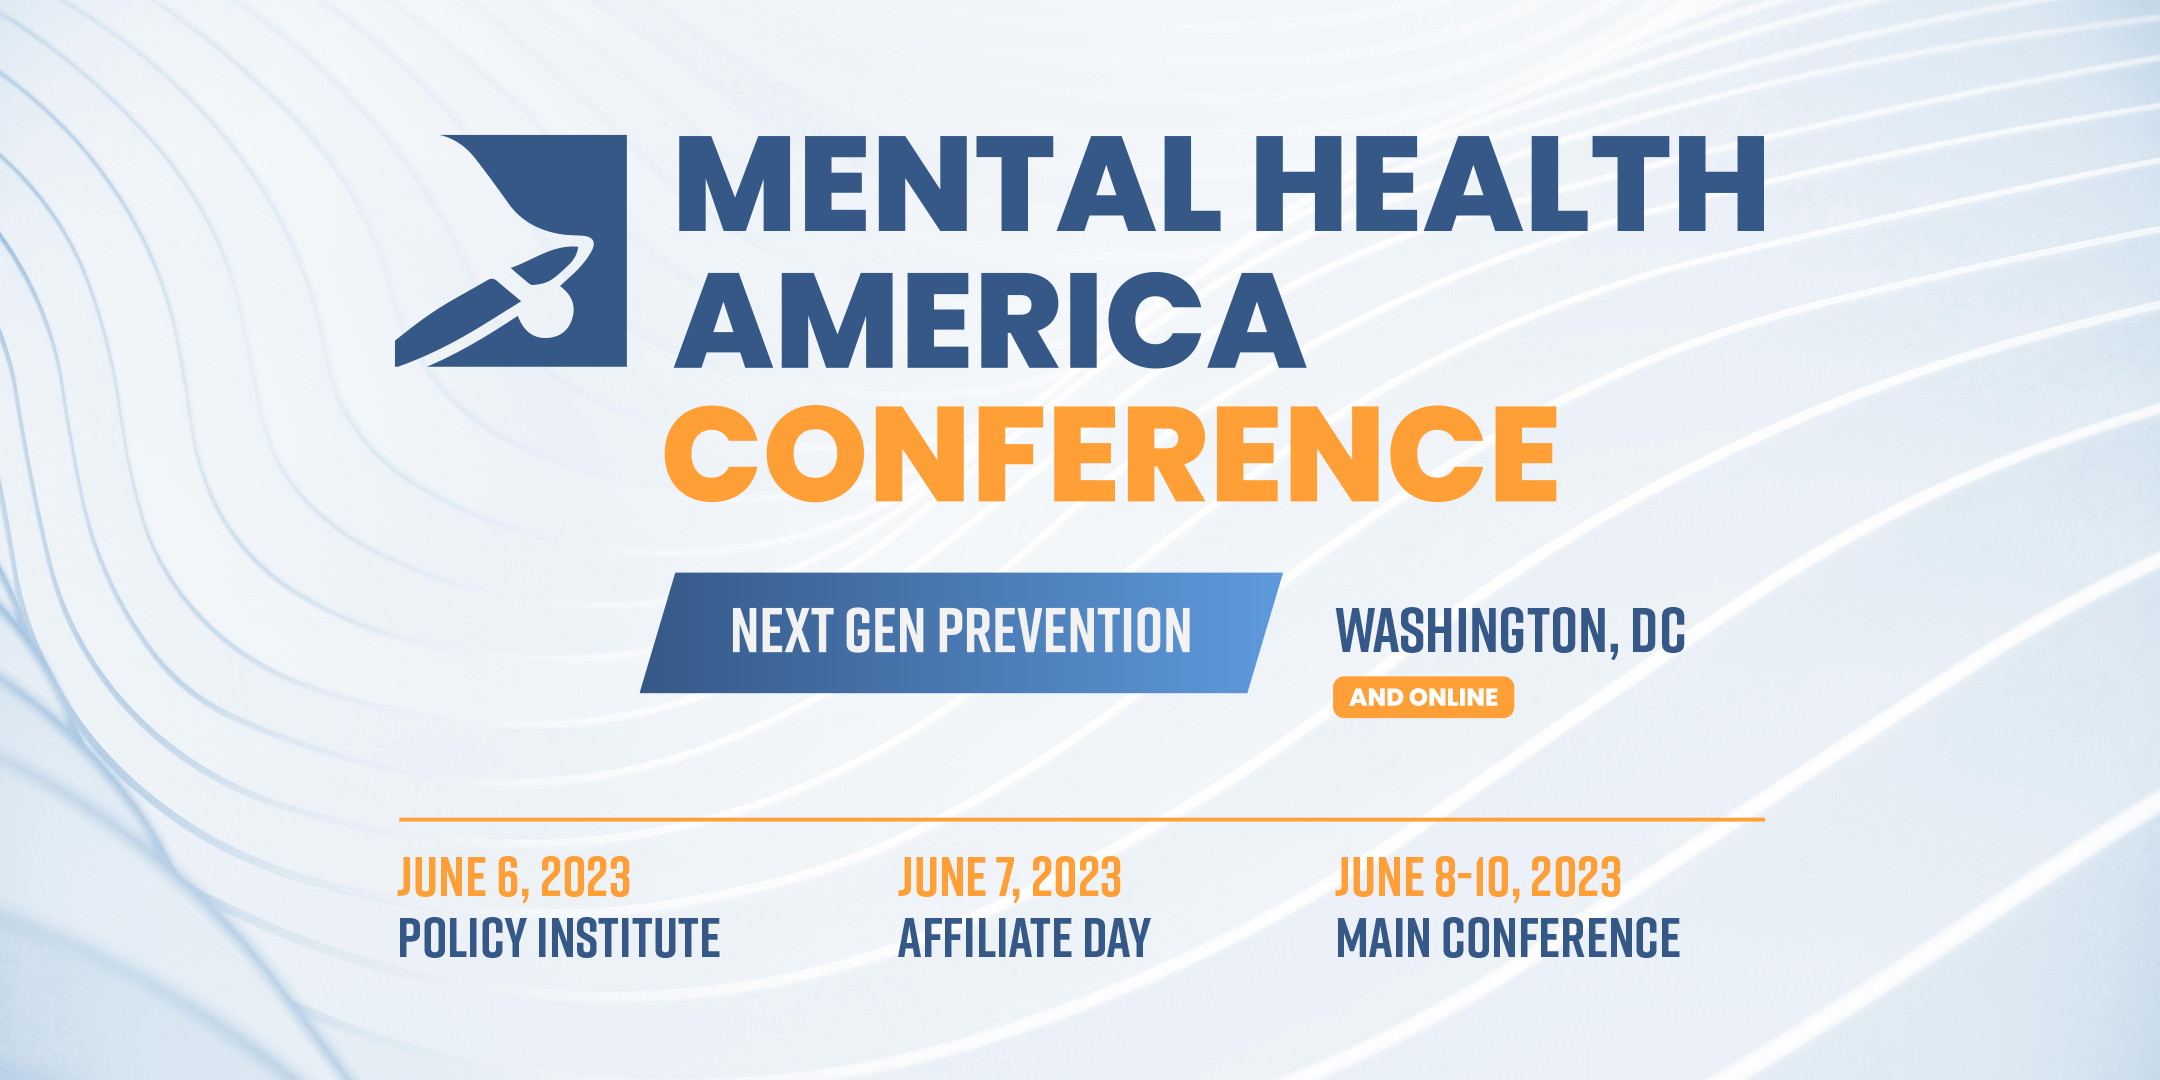 Mental Health America Conference | Next Gen Prevention | Washington, DC and Online | June 6, 2023 Policy Institute | June 7, 2023 Affiliate Day | June 8-10, 2023 Main Conference